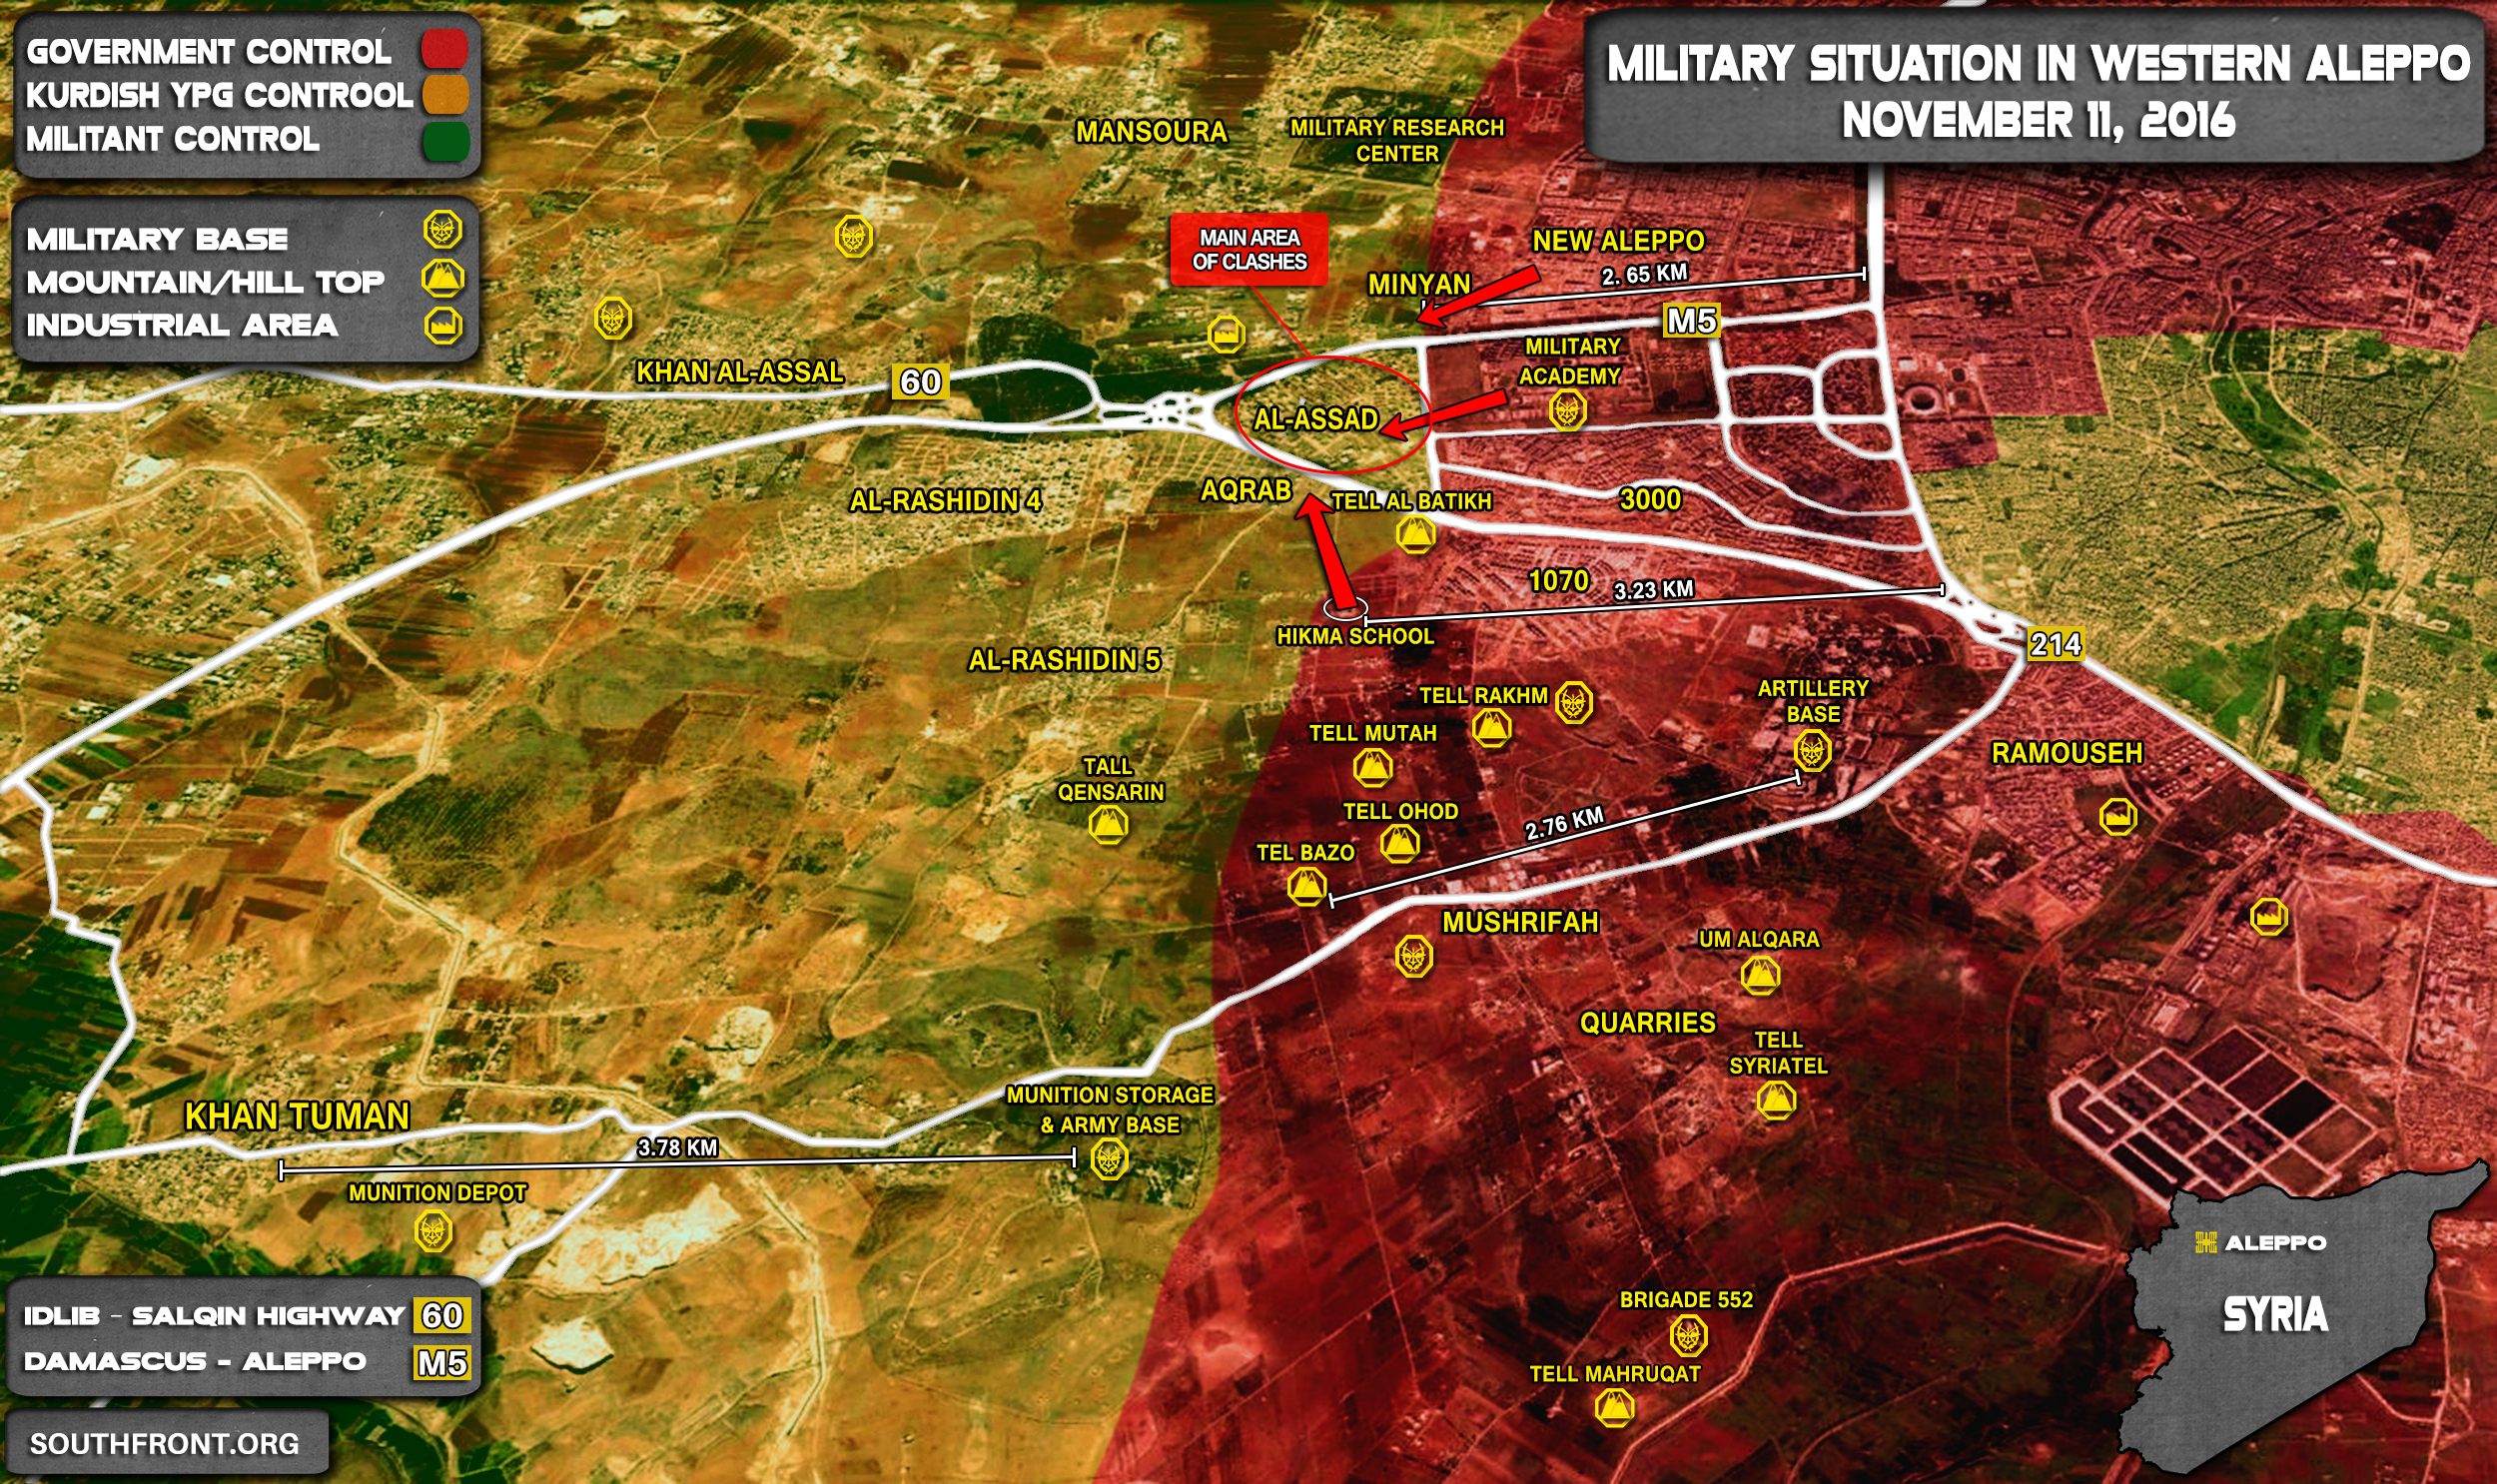 Overview of Military Situation in Aleppo City on November 11, 2016